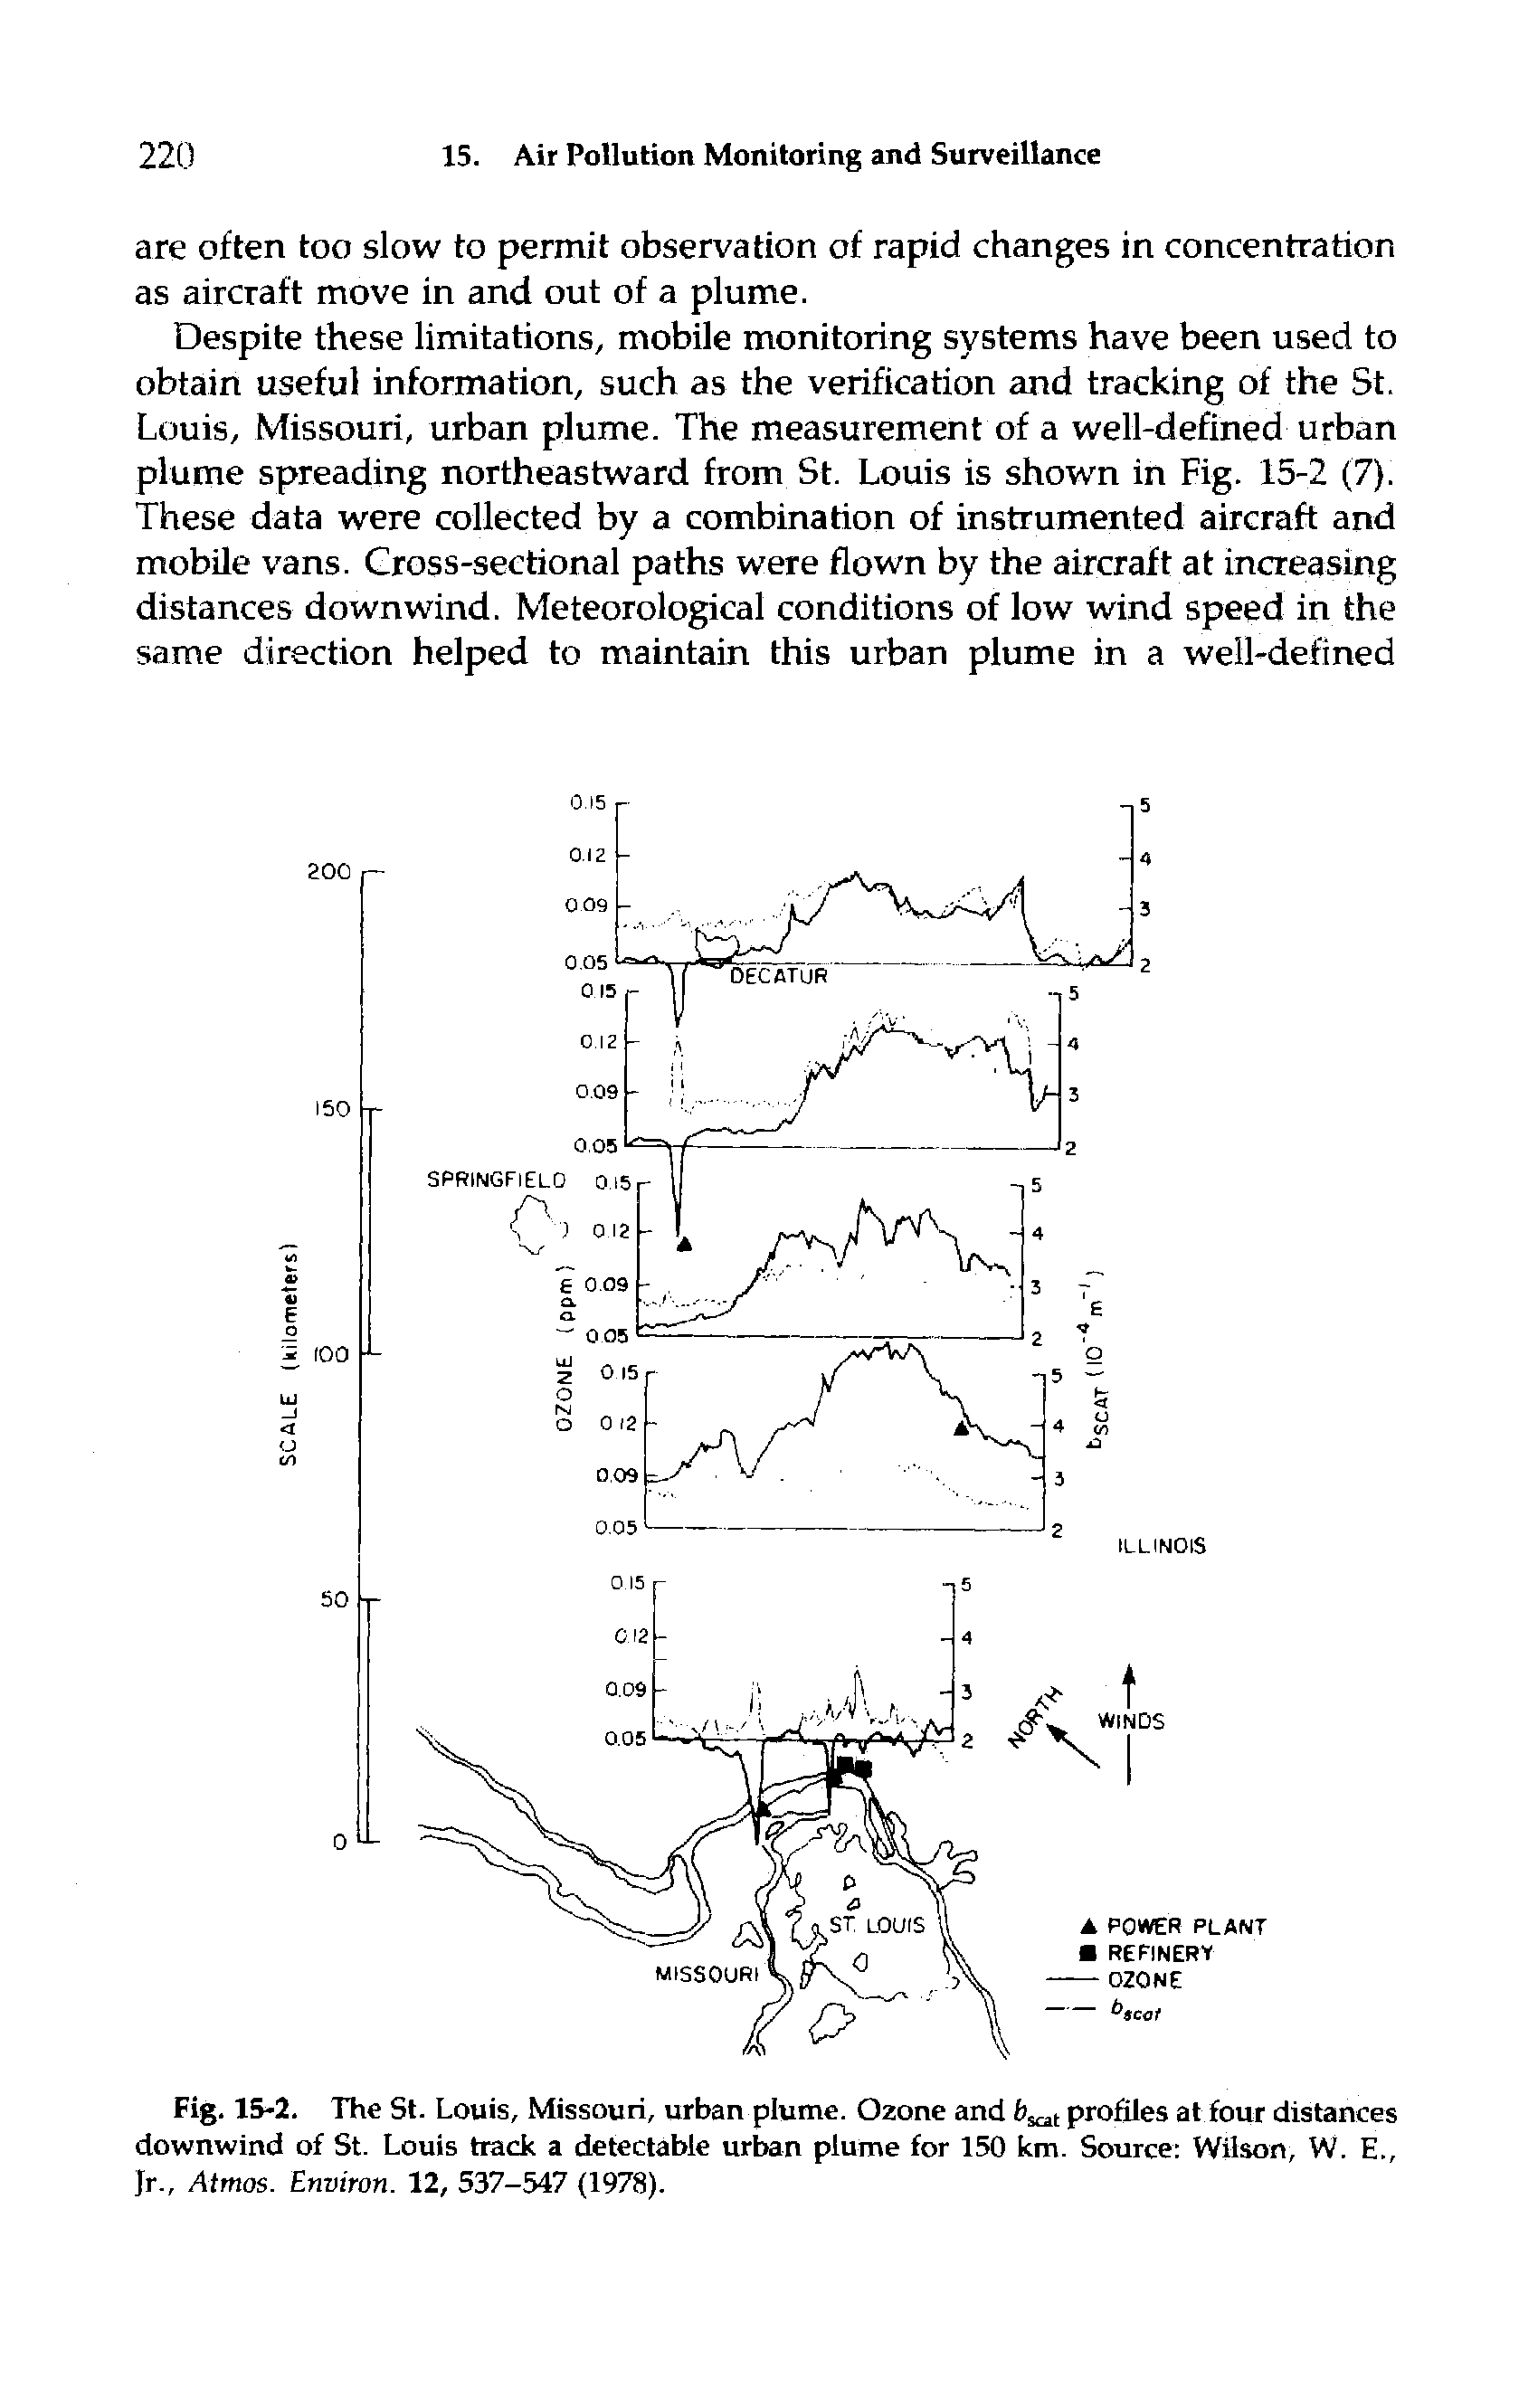 Fig. 15-2. The St. Louis, Missouri, urban plume. Ozone and profiles at four distances downwind of St. Louis track a detectable urban plume for 150 km. Source Wilson, W. E., Jr., Atmos. Environ. 12, 537-547 (1978).